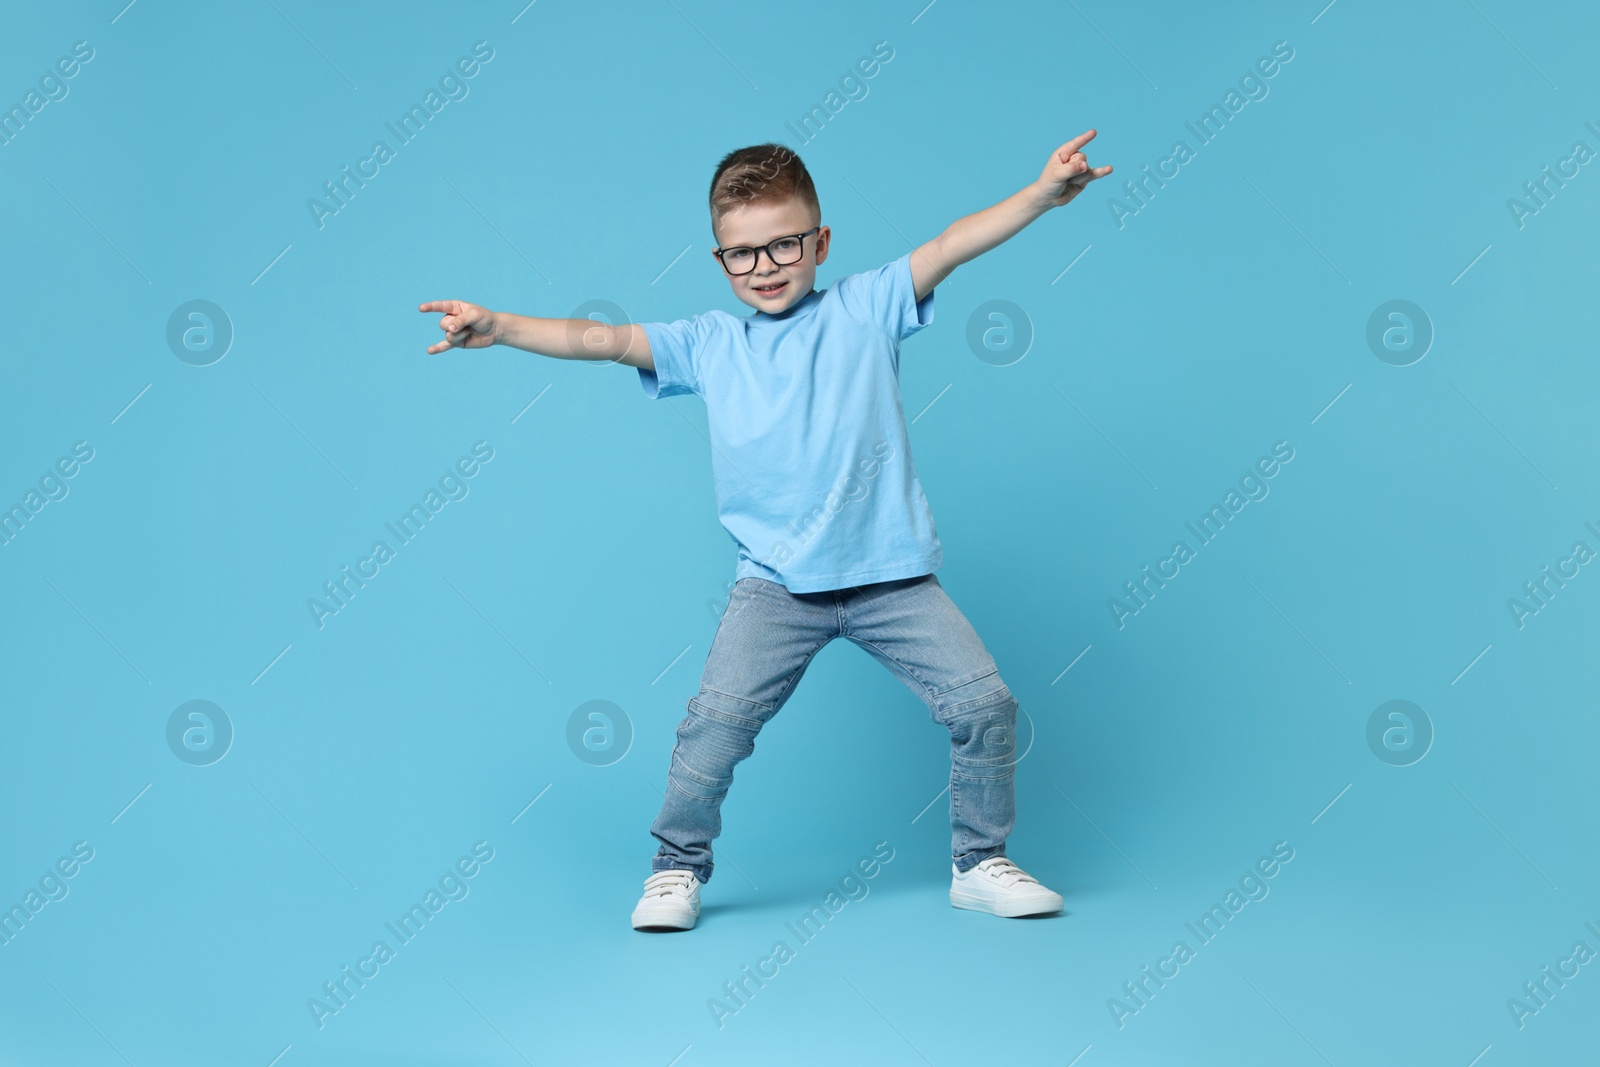 Photo of Happy little boy dancing on light blue background